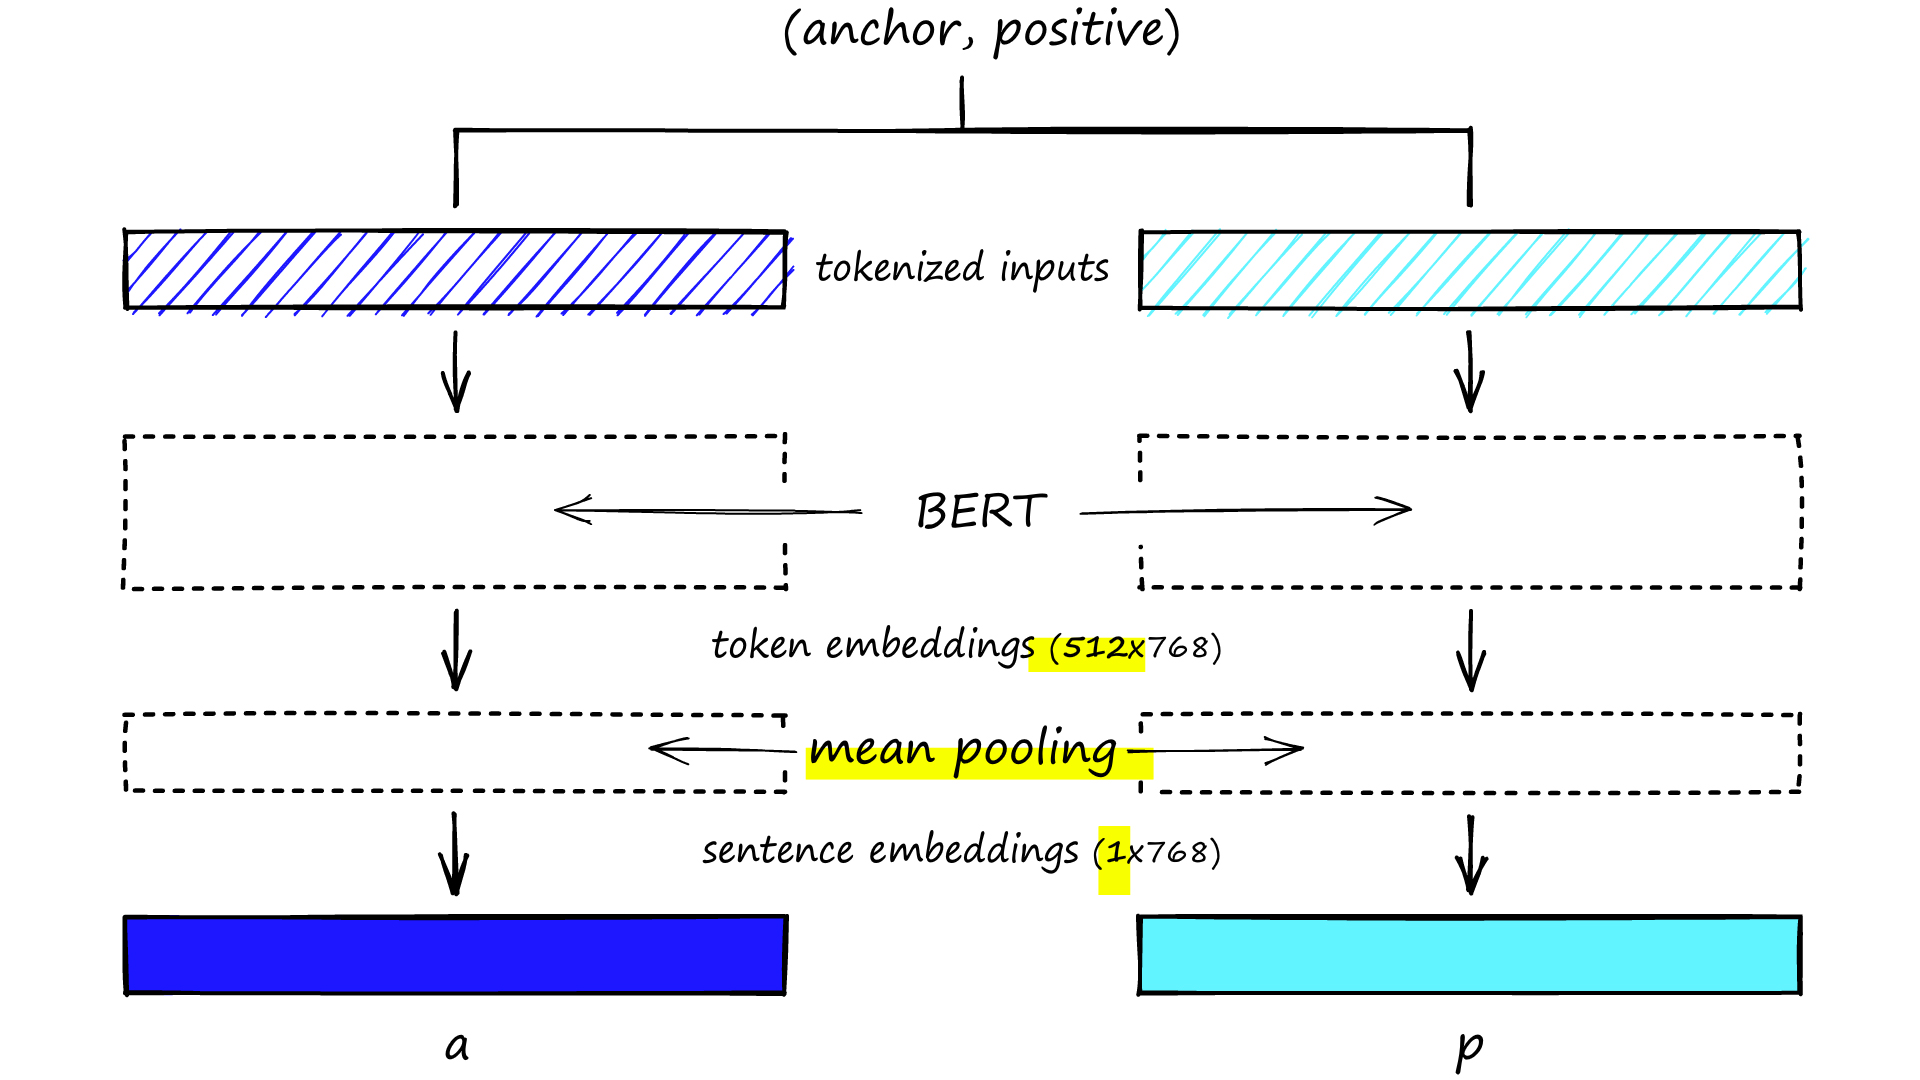 Siamese-BERT network, the anchor and positive sentence pairs are processed separately. A mean pooling layer converts token embeddings into sentence embeddings.sentence A is our anchor and sentence B the positive.